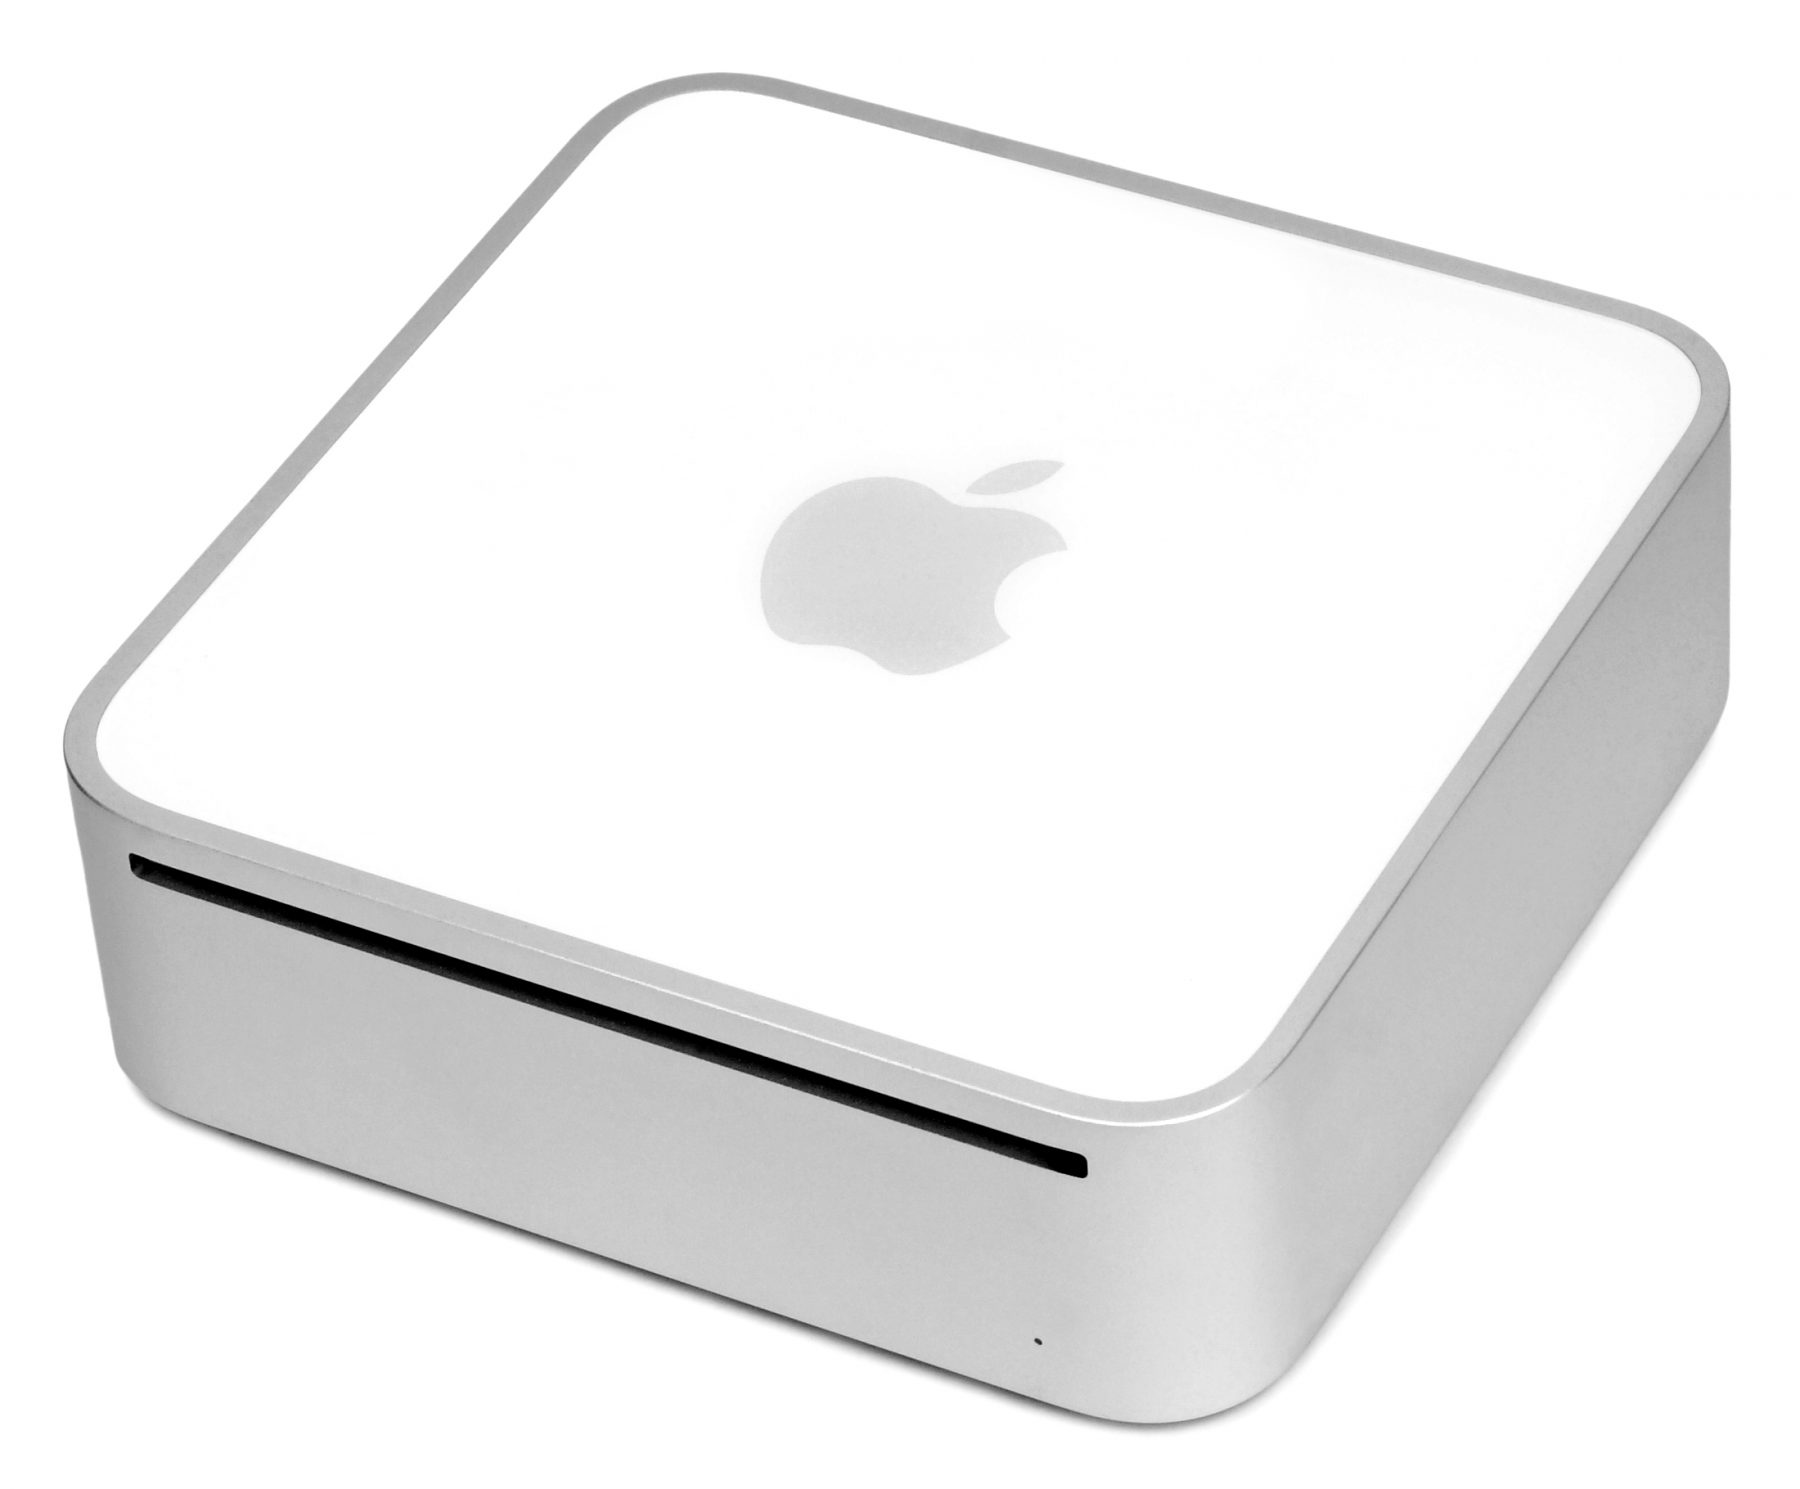 This is how the original Mac Mini looked, before the 2010 re-design